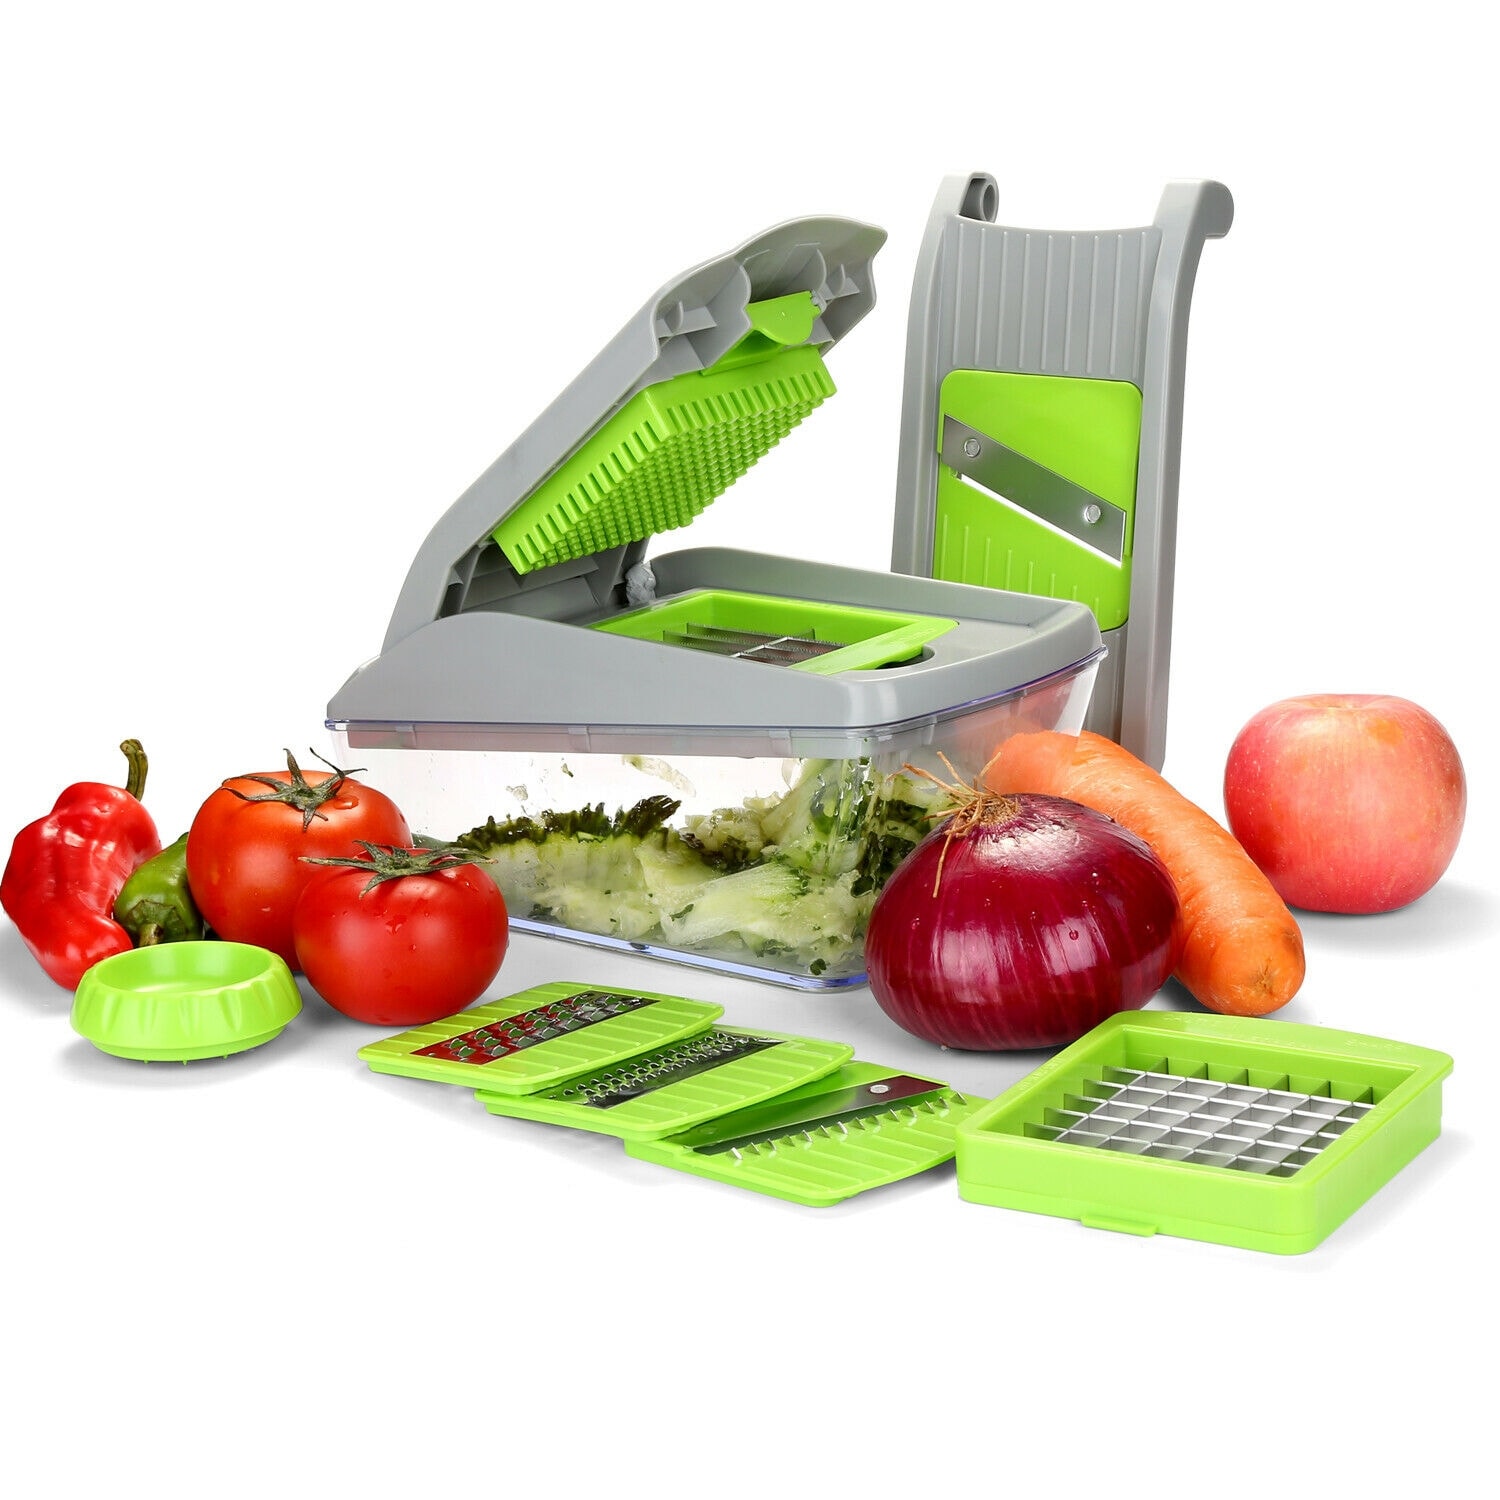 https://ak1.ostkcdn.com/images/products/is/images/direct/deadd44581fe3e269a61f306434002b79a900bb4/Vegetable-Chopper-13-Pieces%2C-Vegetable-Spiralizer-Mandoline-Slicer-Vegetable-Dicer-Food-Chopper-Dicer-Pro%2C---M.jpg